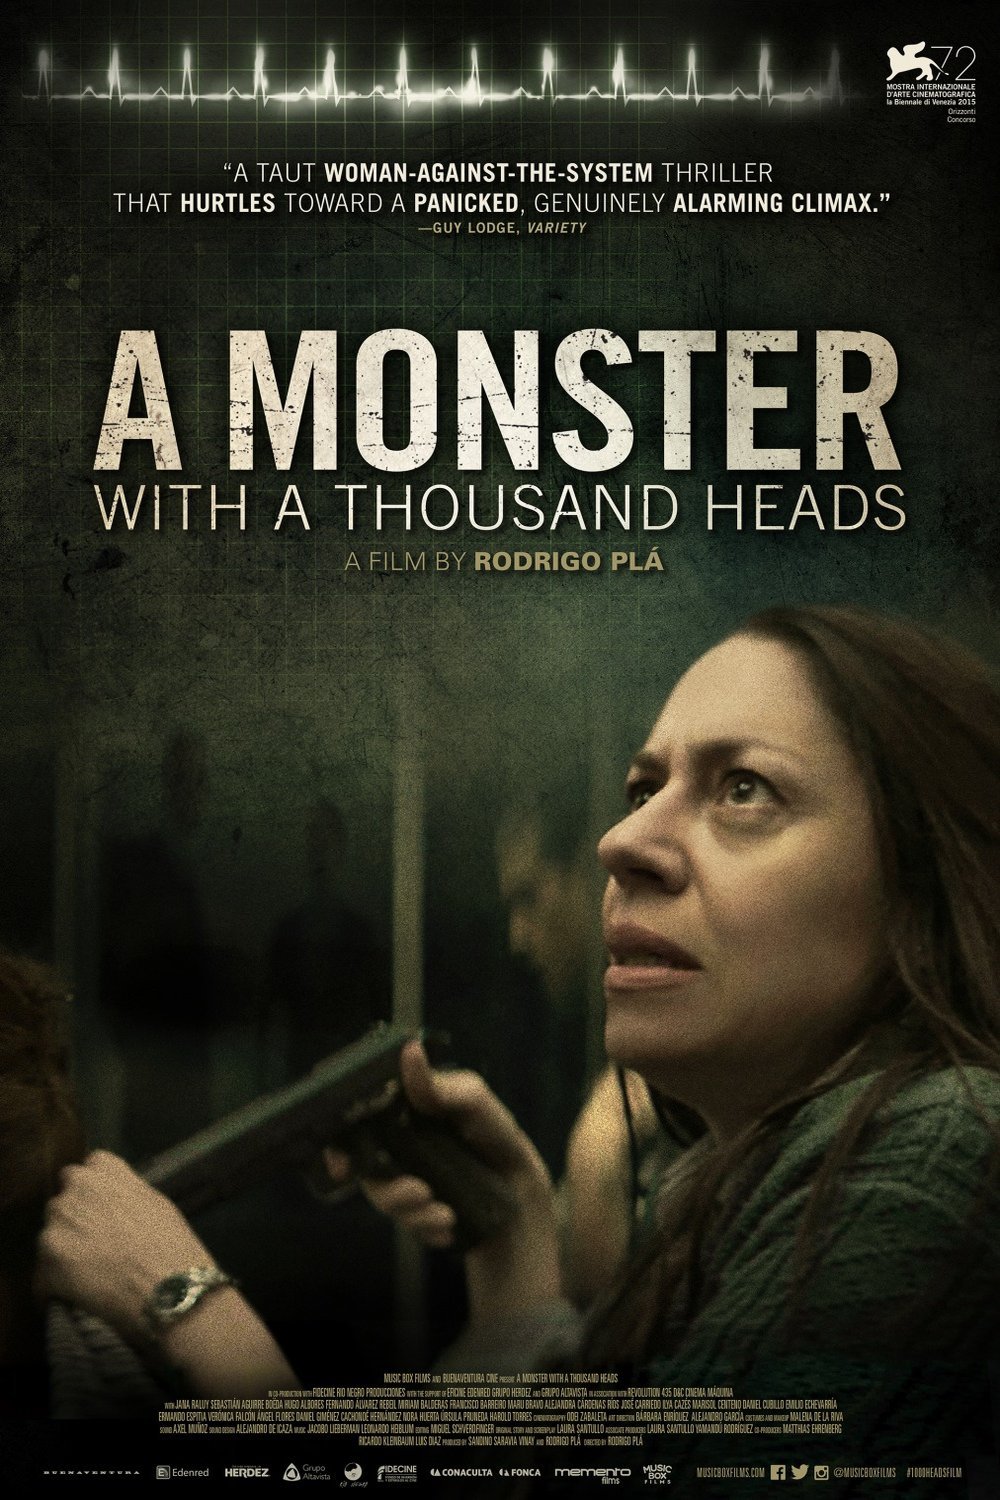 Spanish poster of the movie A Monster with a Thousand Heads